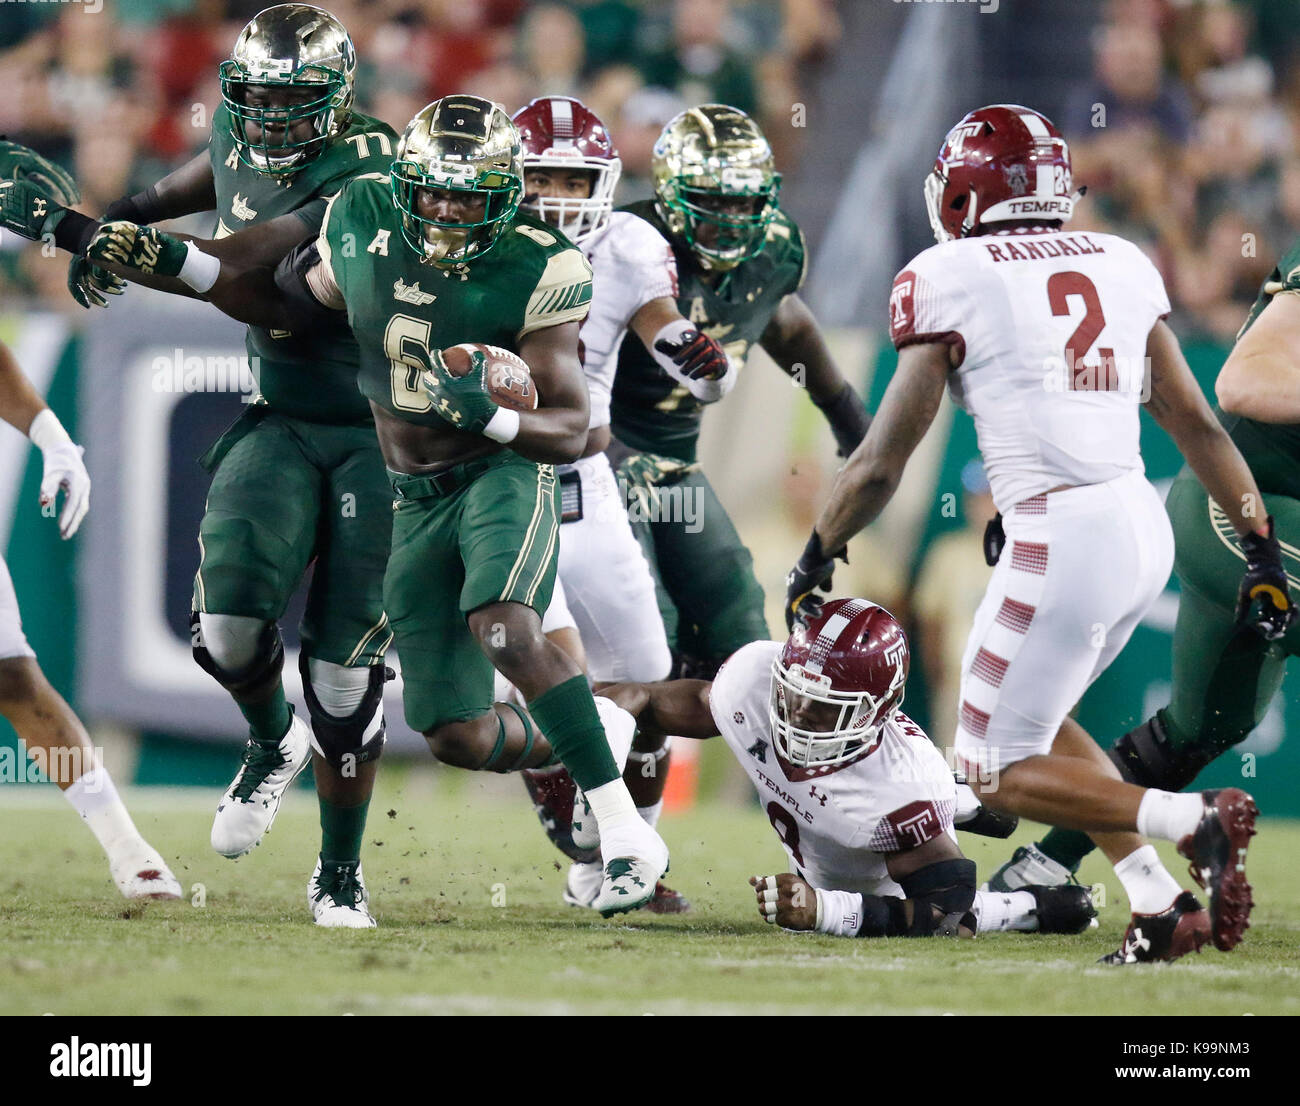 City, Florida, USA. 21st Sep, 2017. OCTAVIO JONES | Times .South Florida running back Darius Tice (6) finds a holes in the Temple Owls defense during the first half at Raymond James Stadium in Tampa, Florida on Thursday, September 21, 2017. Credit: Octavio Jones/Tampa Bay Times/ZUMA Wire/Alamy Live News Stock Photo